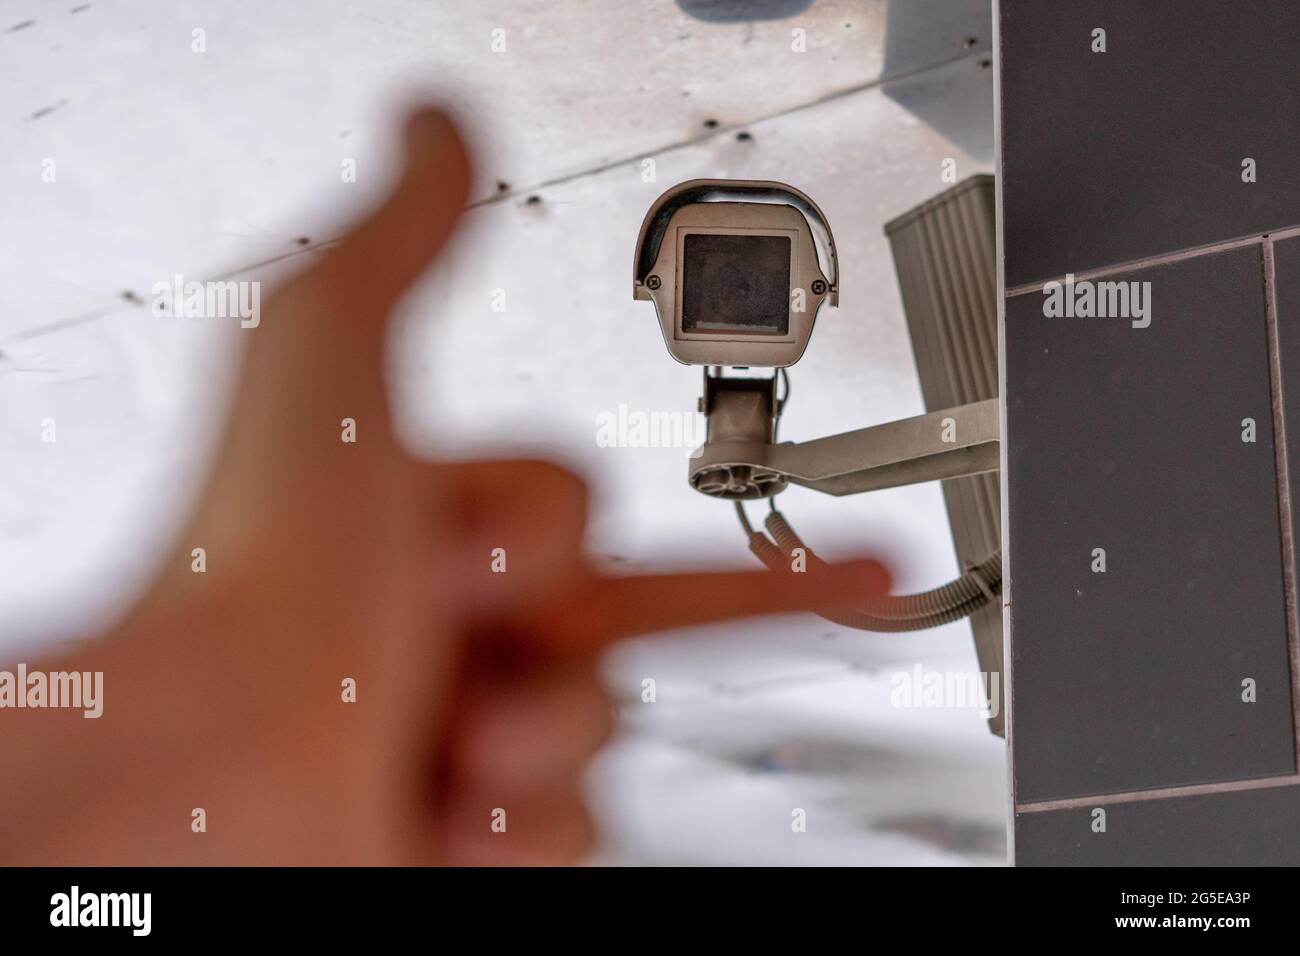 fpv hand show middle finger to cctv camera in public city street Stock Photo